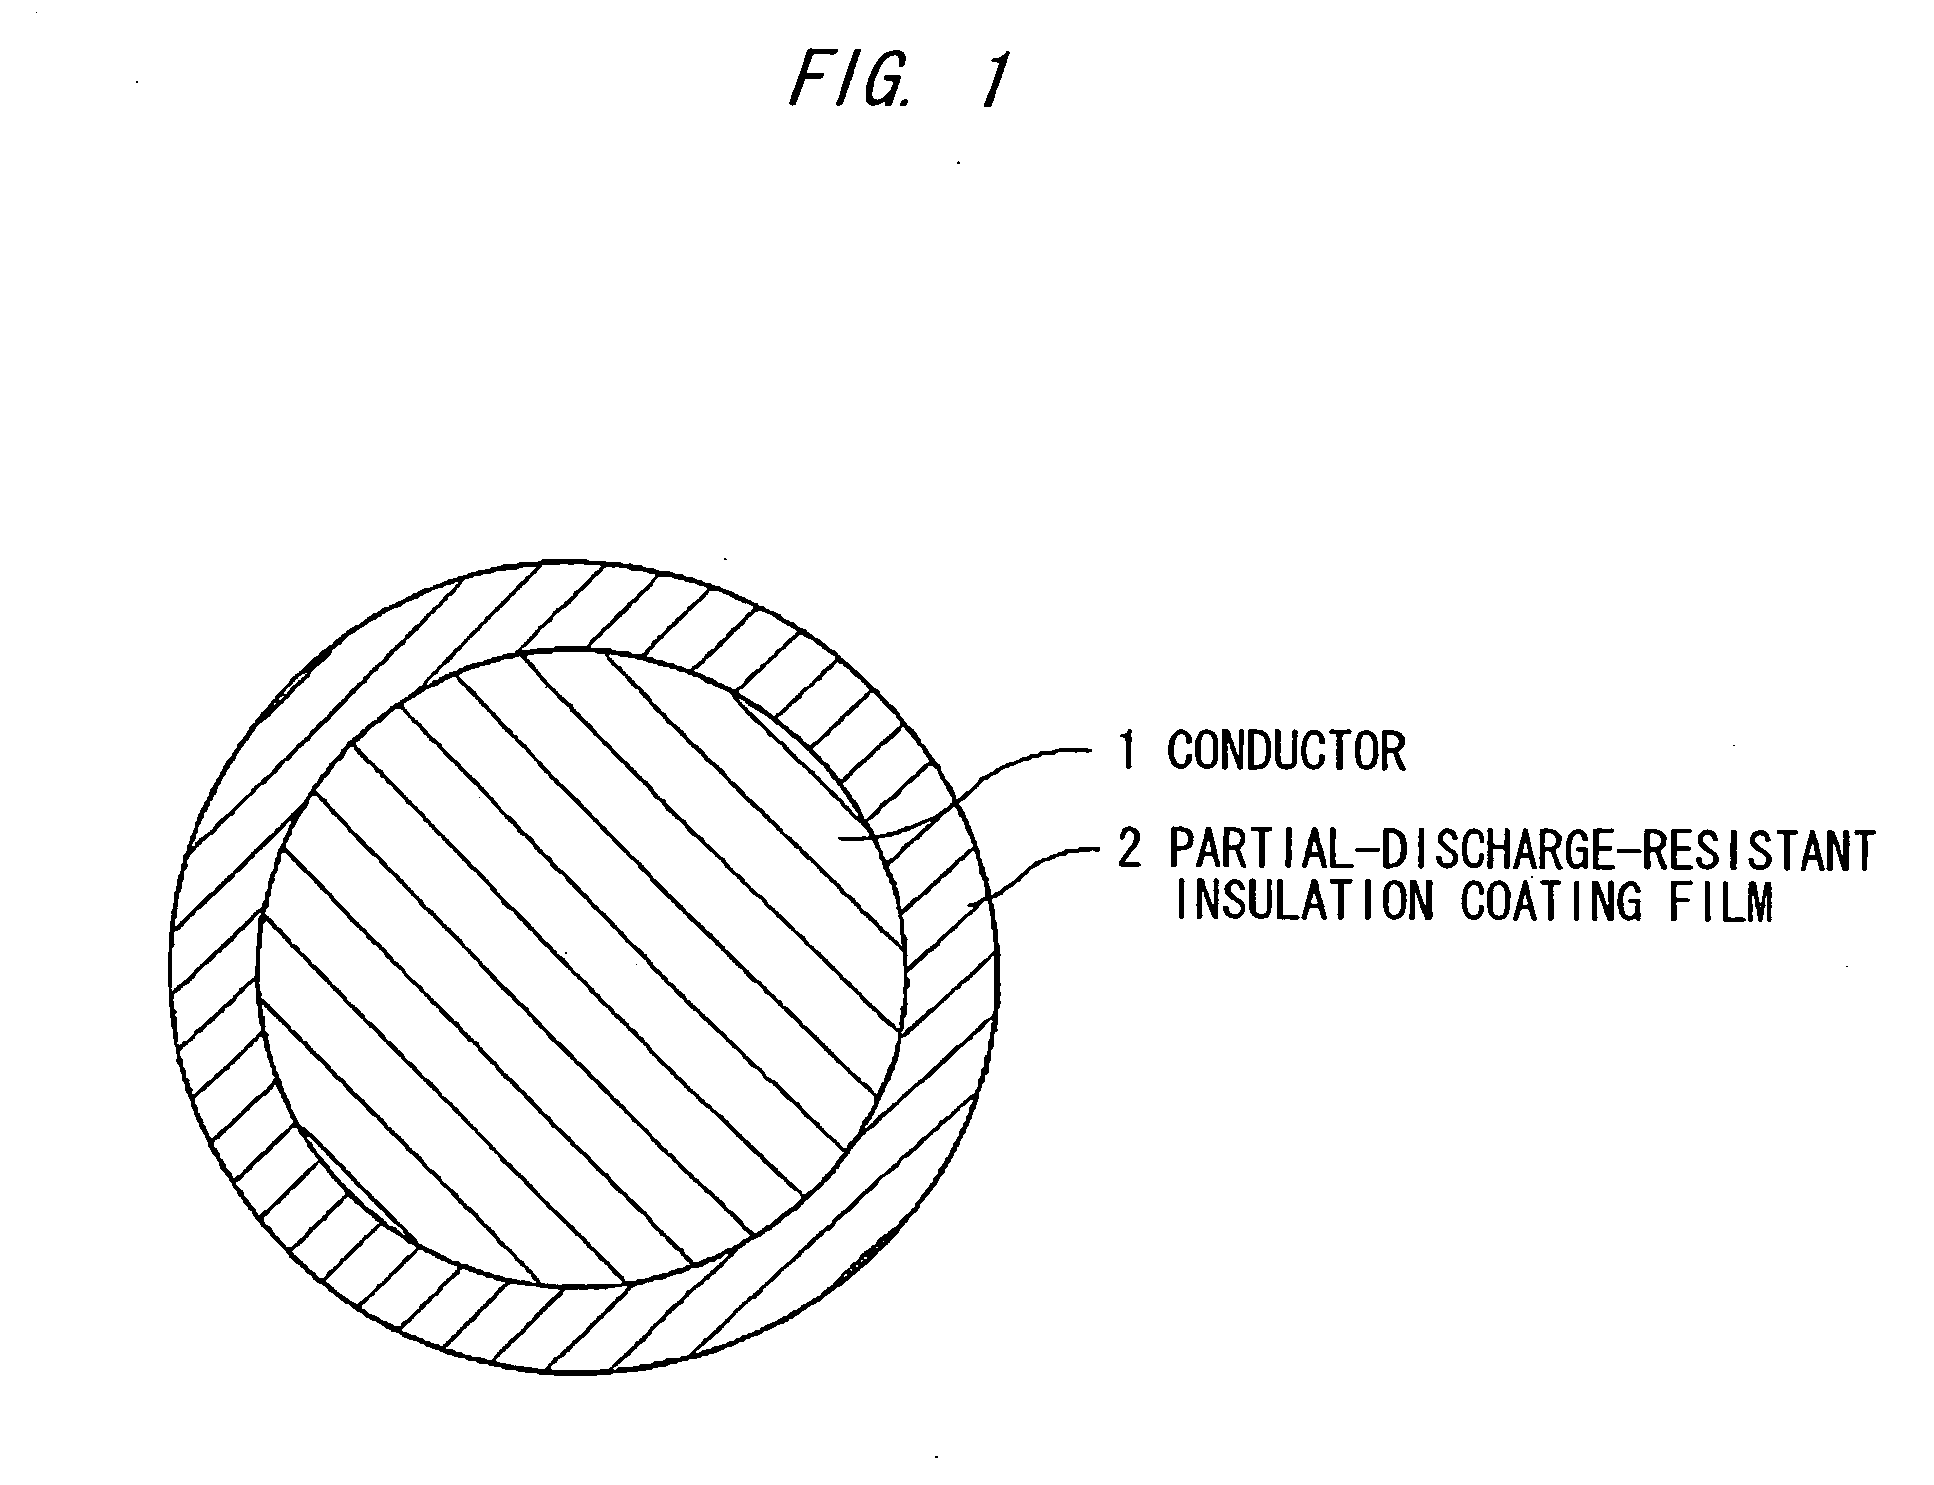 Partial-discharge-resistant insulating varnish, insulated wire and method of making the same